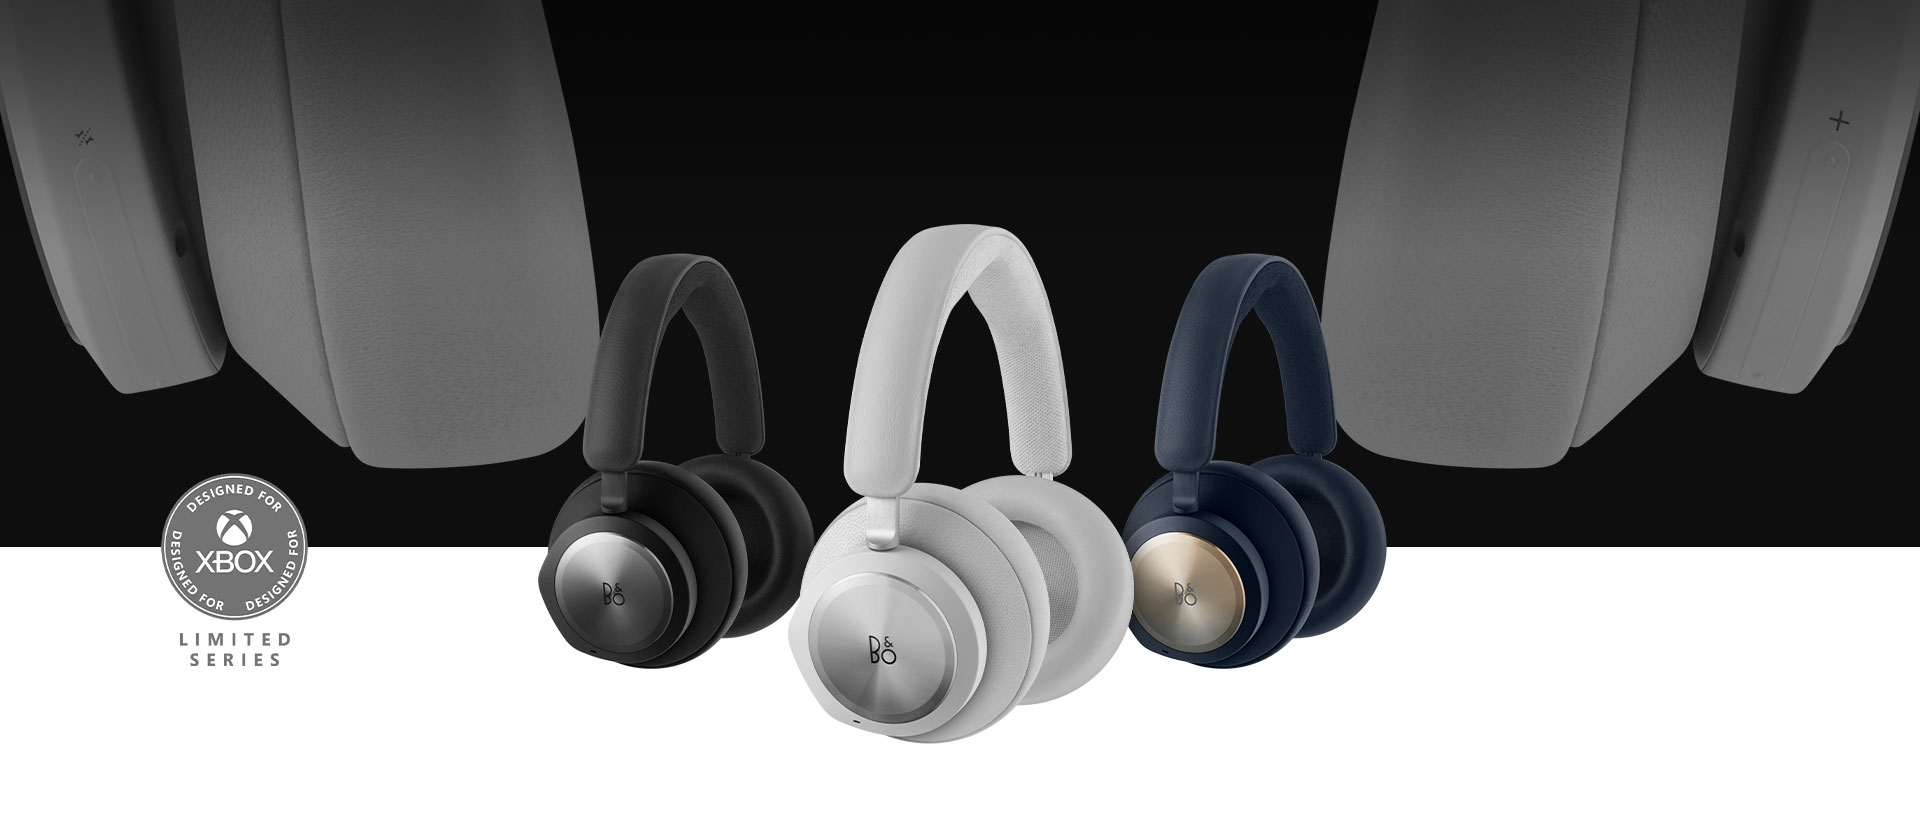 Designed for Xbox, Bang and Olufsen grey headset in front with the black and navy headset beside it